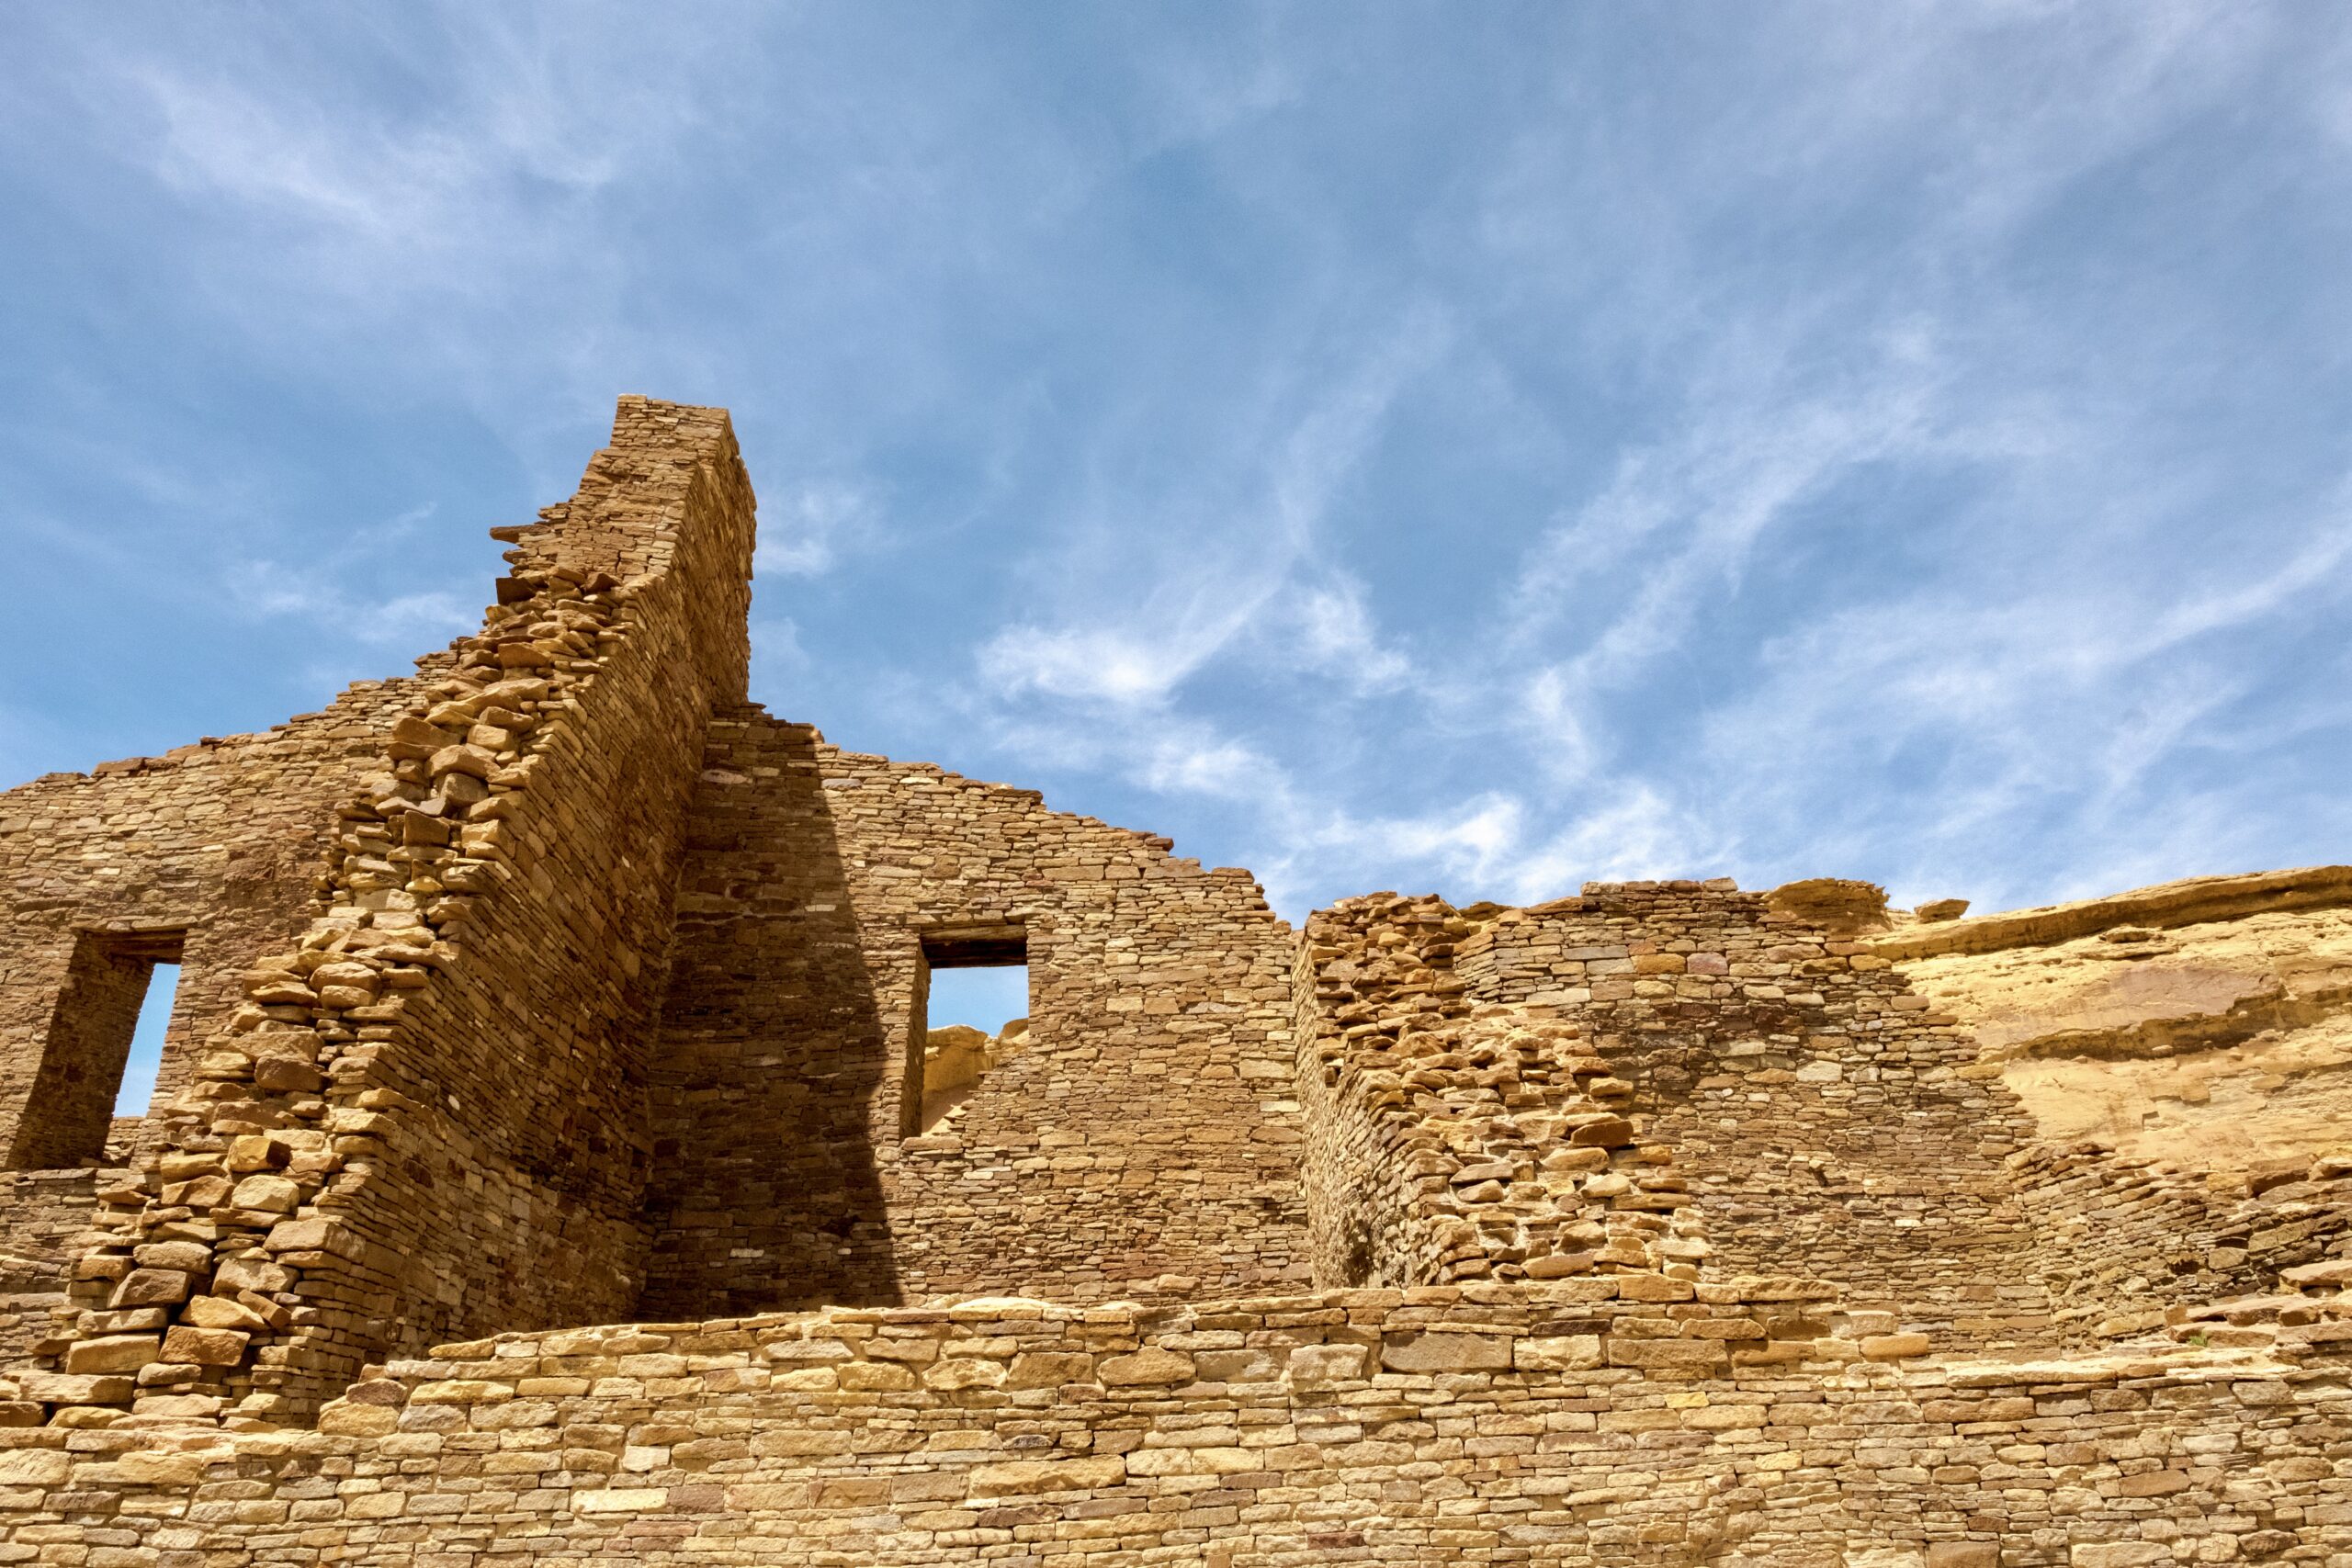 Sign the Petition: Chaco Canyon Deserves Permanent Protection